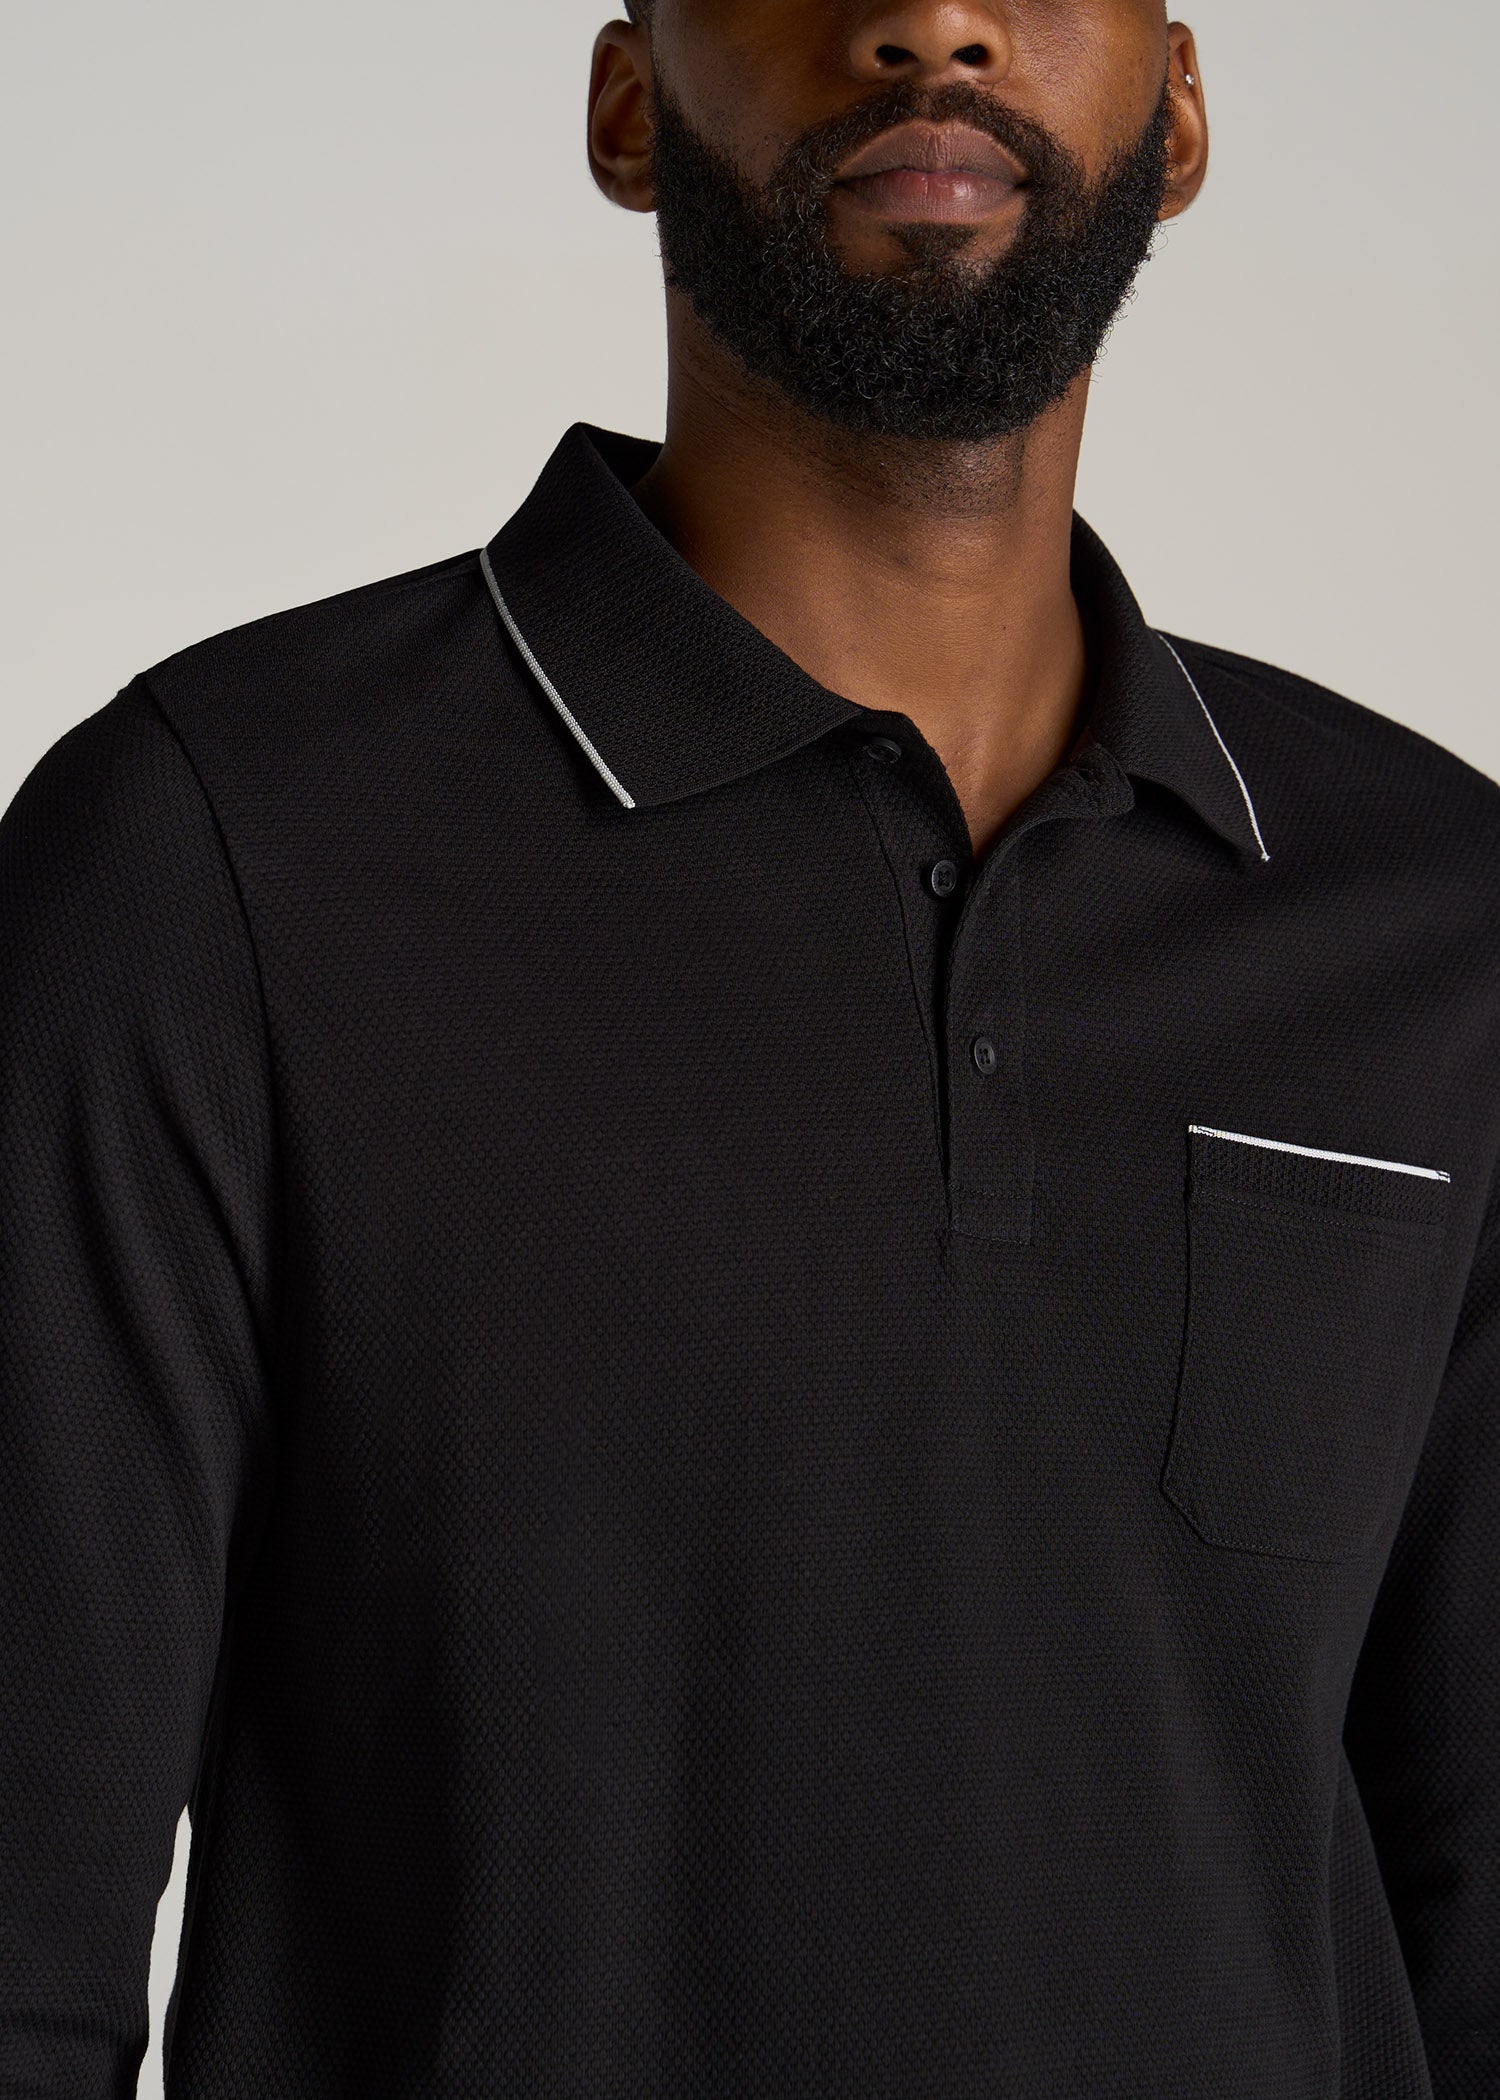       American-Tall-Men-3-Button-Placket-Polo-Shirt-Black-and-White-detail